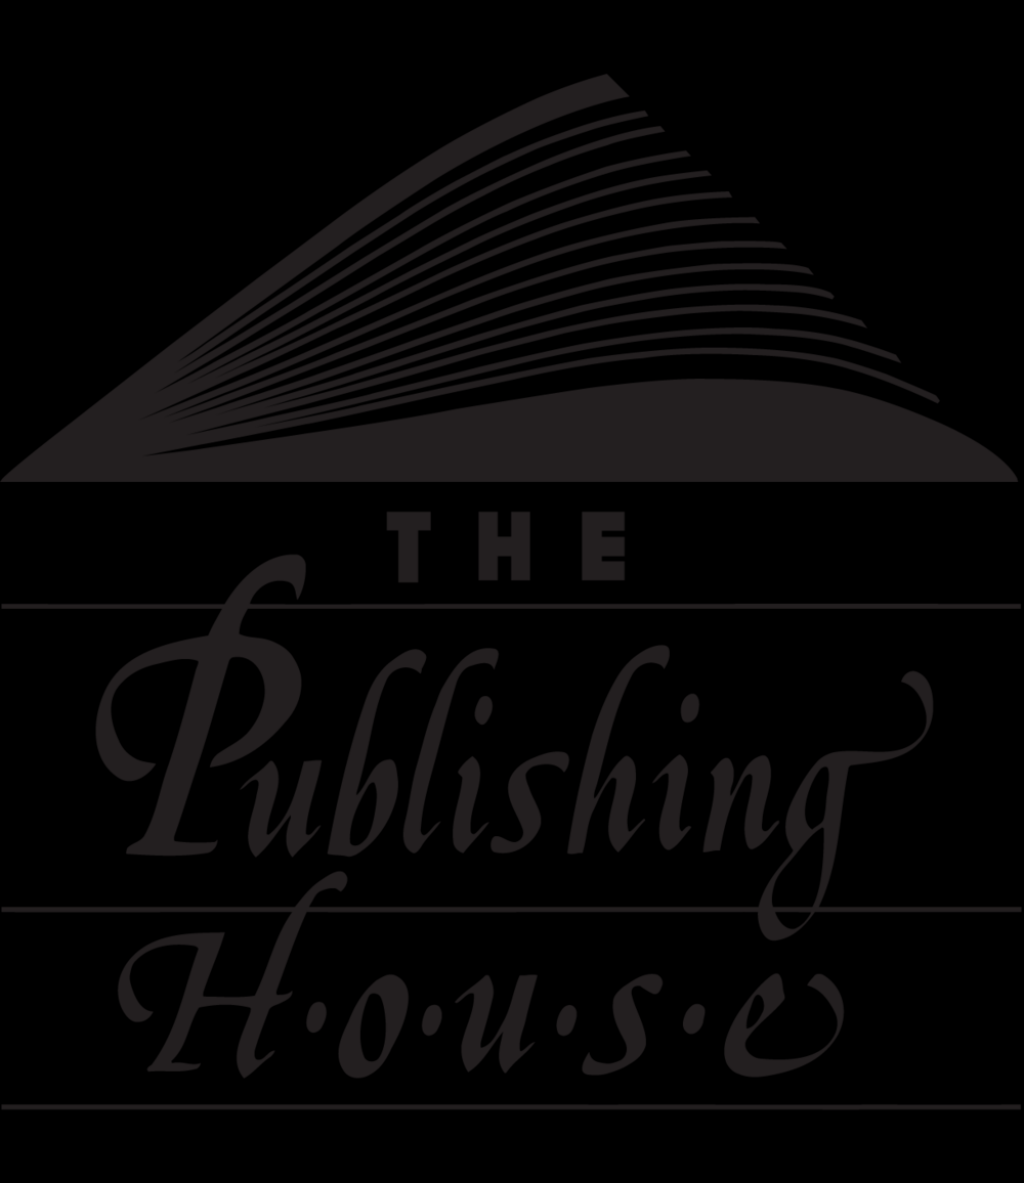 Picture of: Publishing House